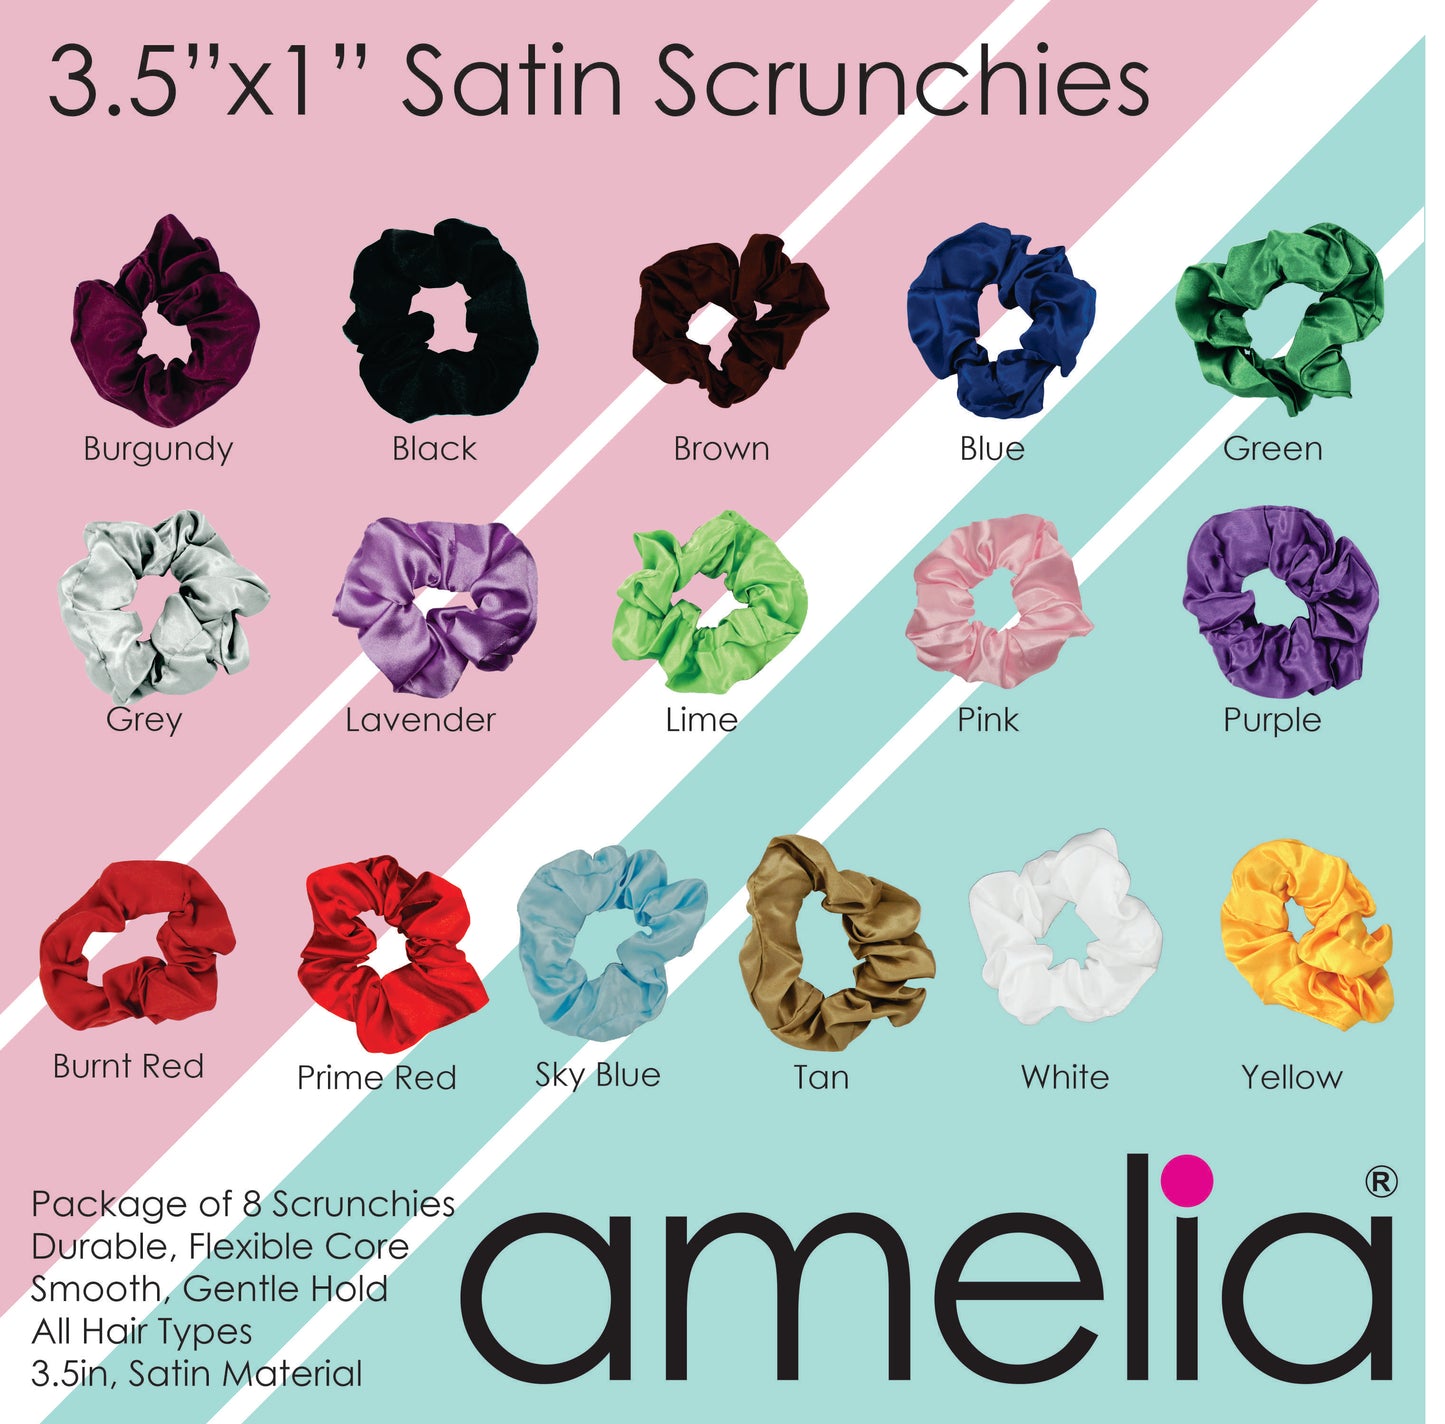 Amelia Beauty Products, Ocean Blend Satin Scrunchies, 3.5in Diameter, Gentle on Hair, Strong Hold, No Snag, No Dents or Creases. 8 Pack